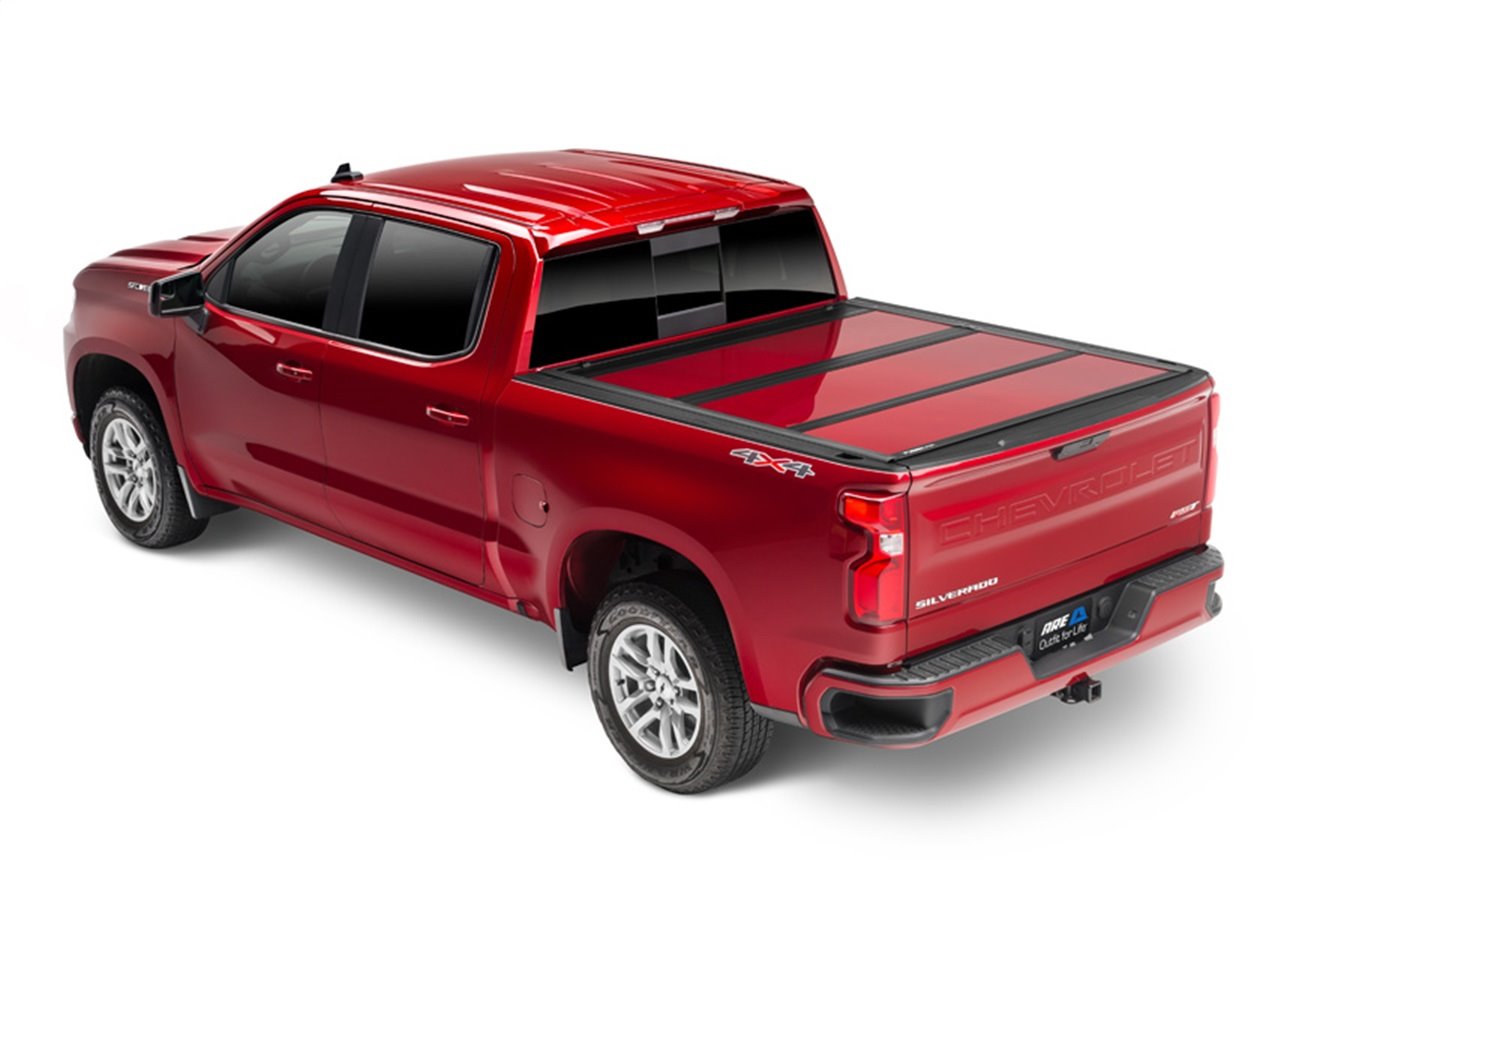 Fusion Tonneau Cover Fits Select Chevrolet Silverado/GMC Sierra 1500 [Bed: 5 ft. 8 in.]